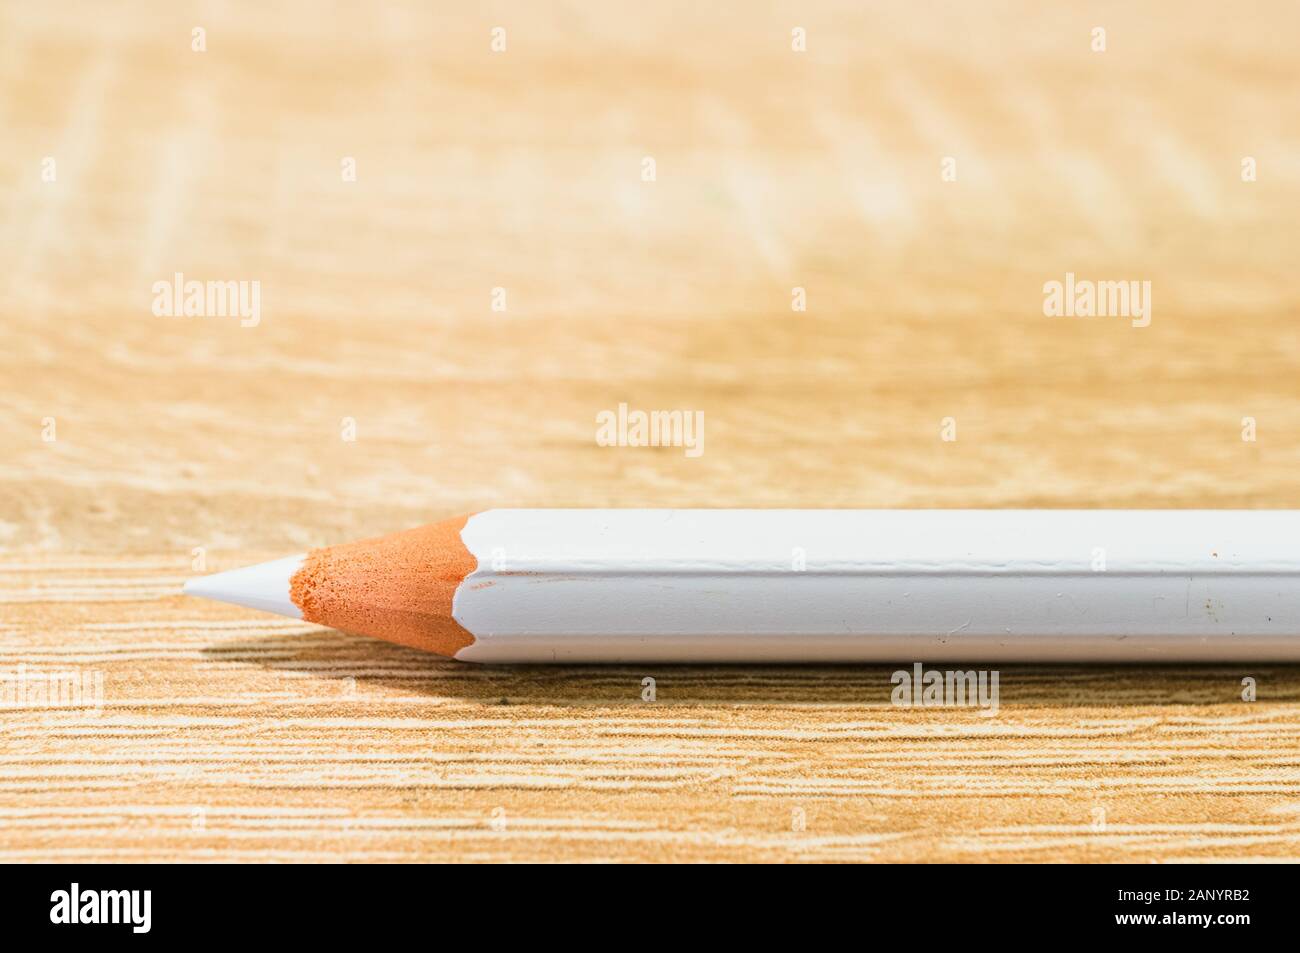 Closeup shot of a white pencil on a wooden surface Stock Photo